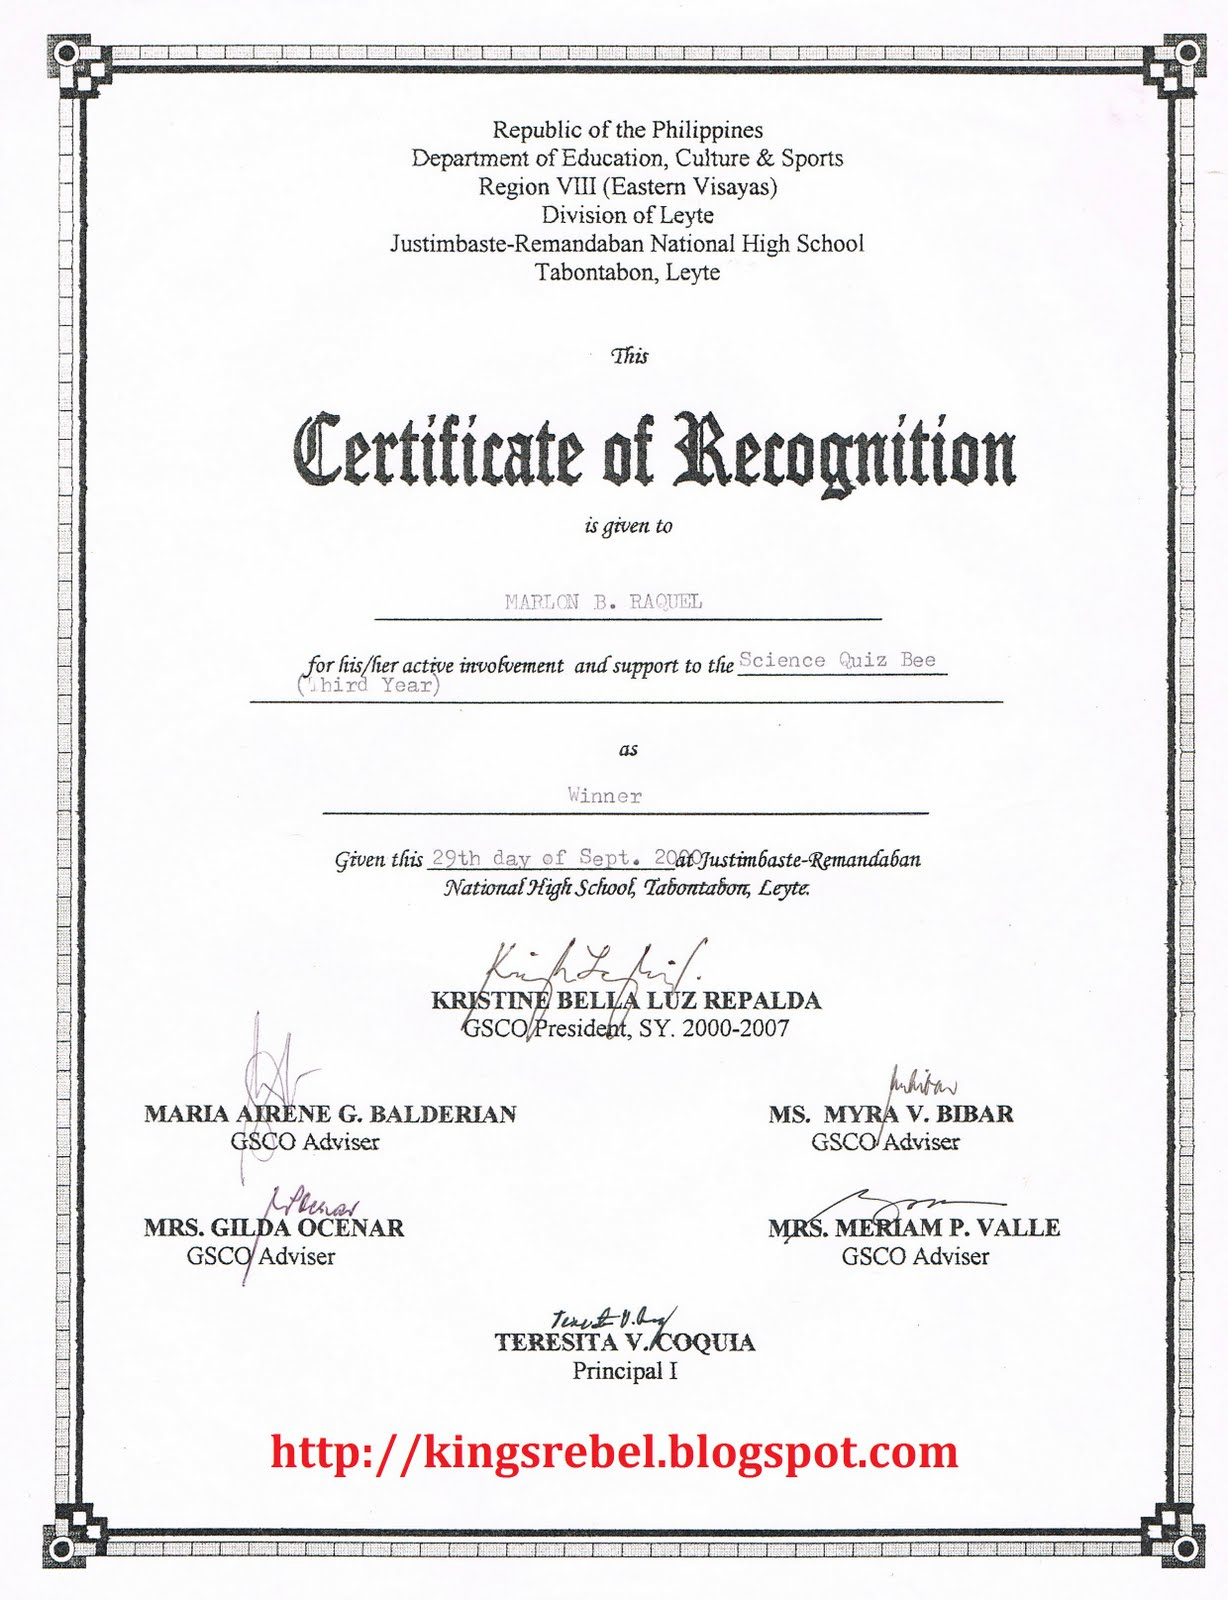 Tidbits And Bytes: Example Of Certificate Of Recognition - Science Quiz Bee pertaining to 6 Printable Science Certificate Templates